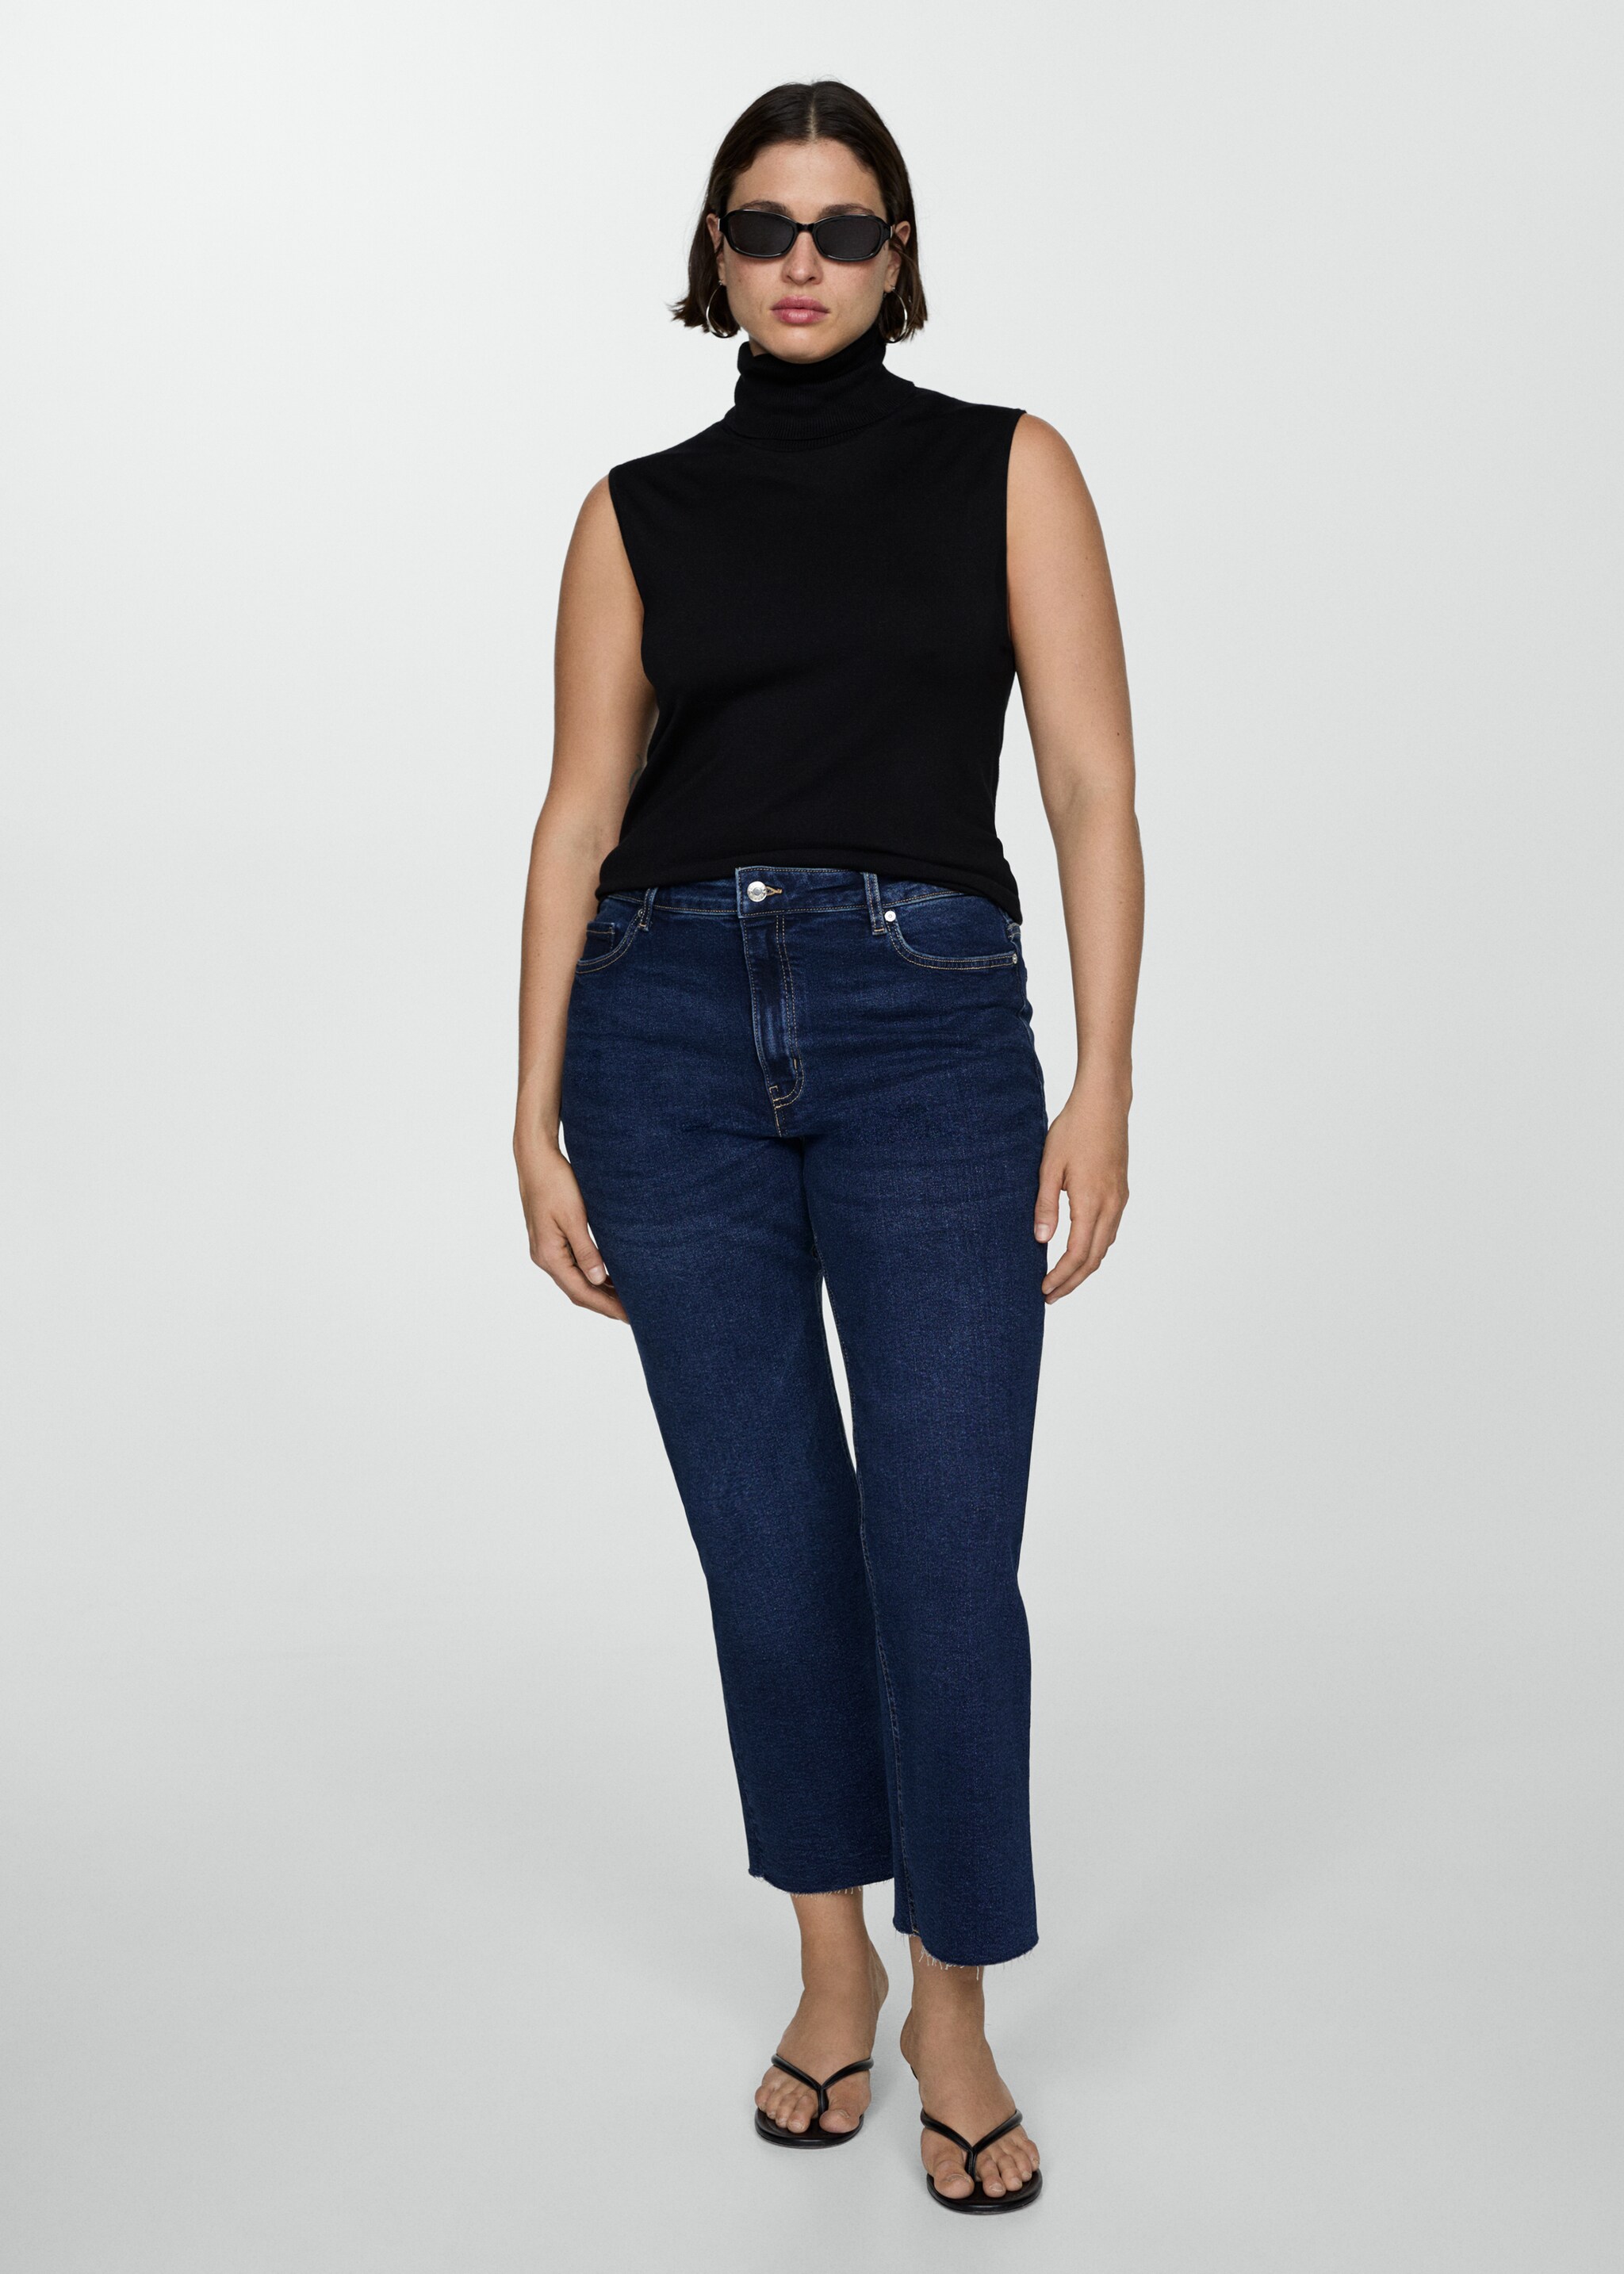 Sienna flared cropped jeans - Details of the article 3